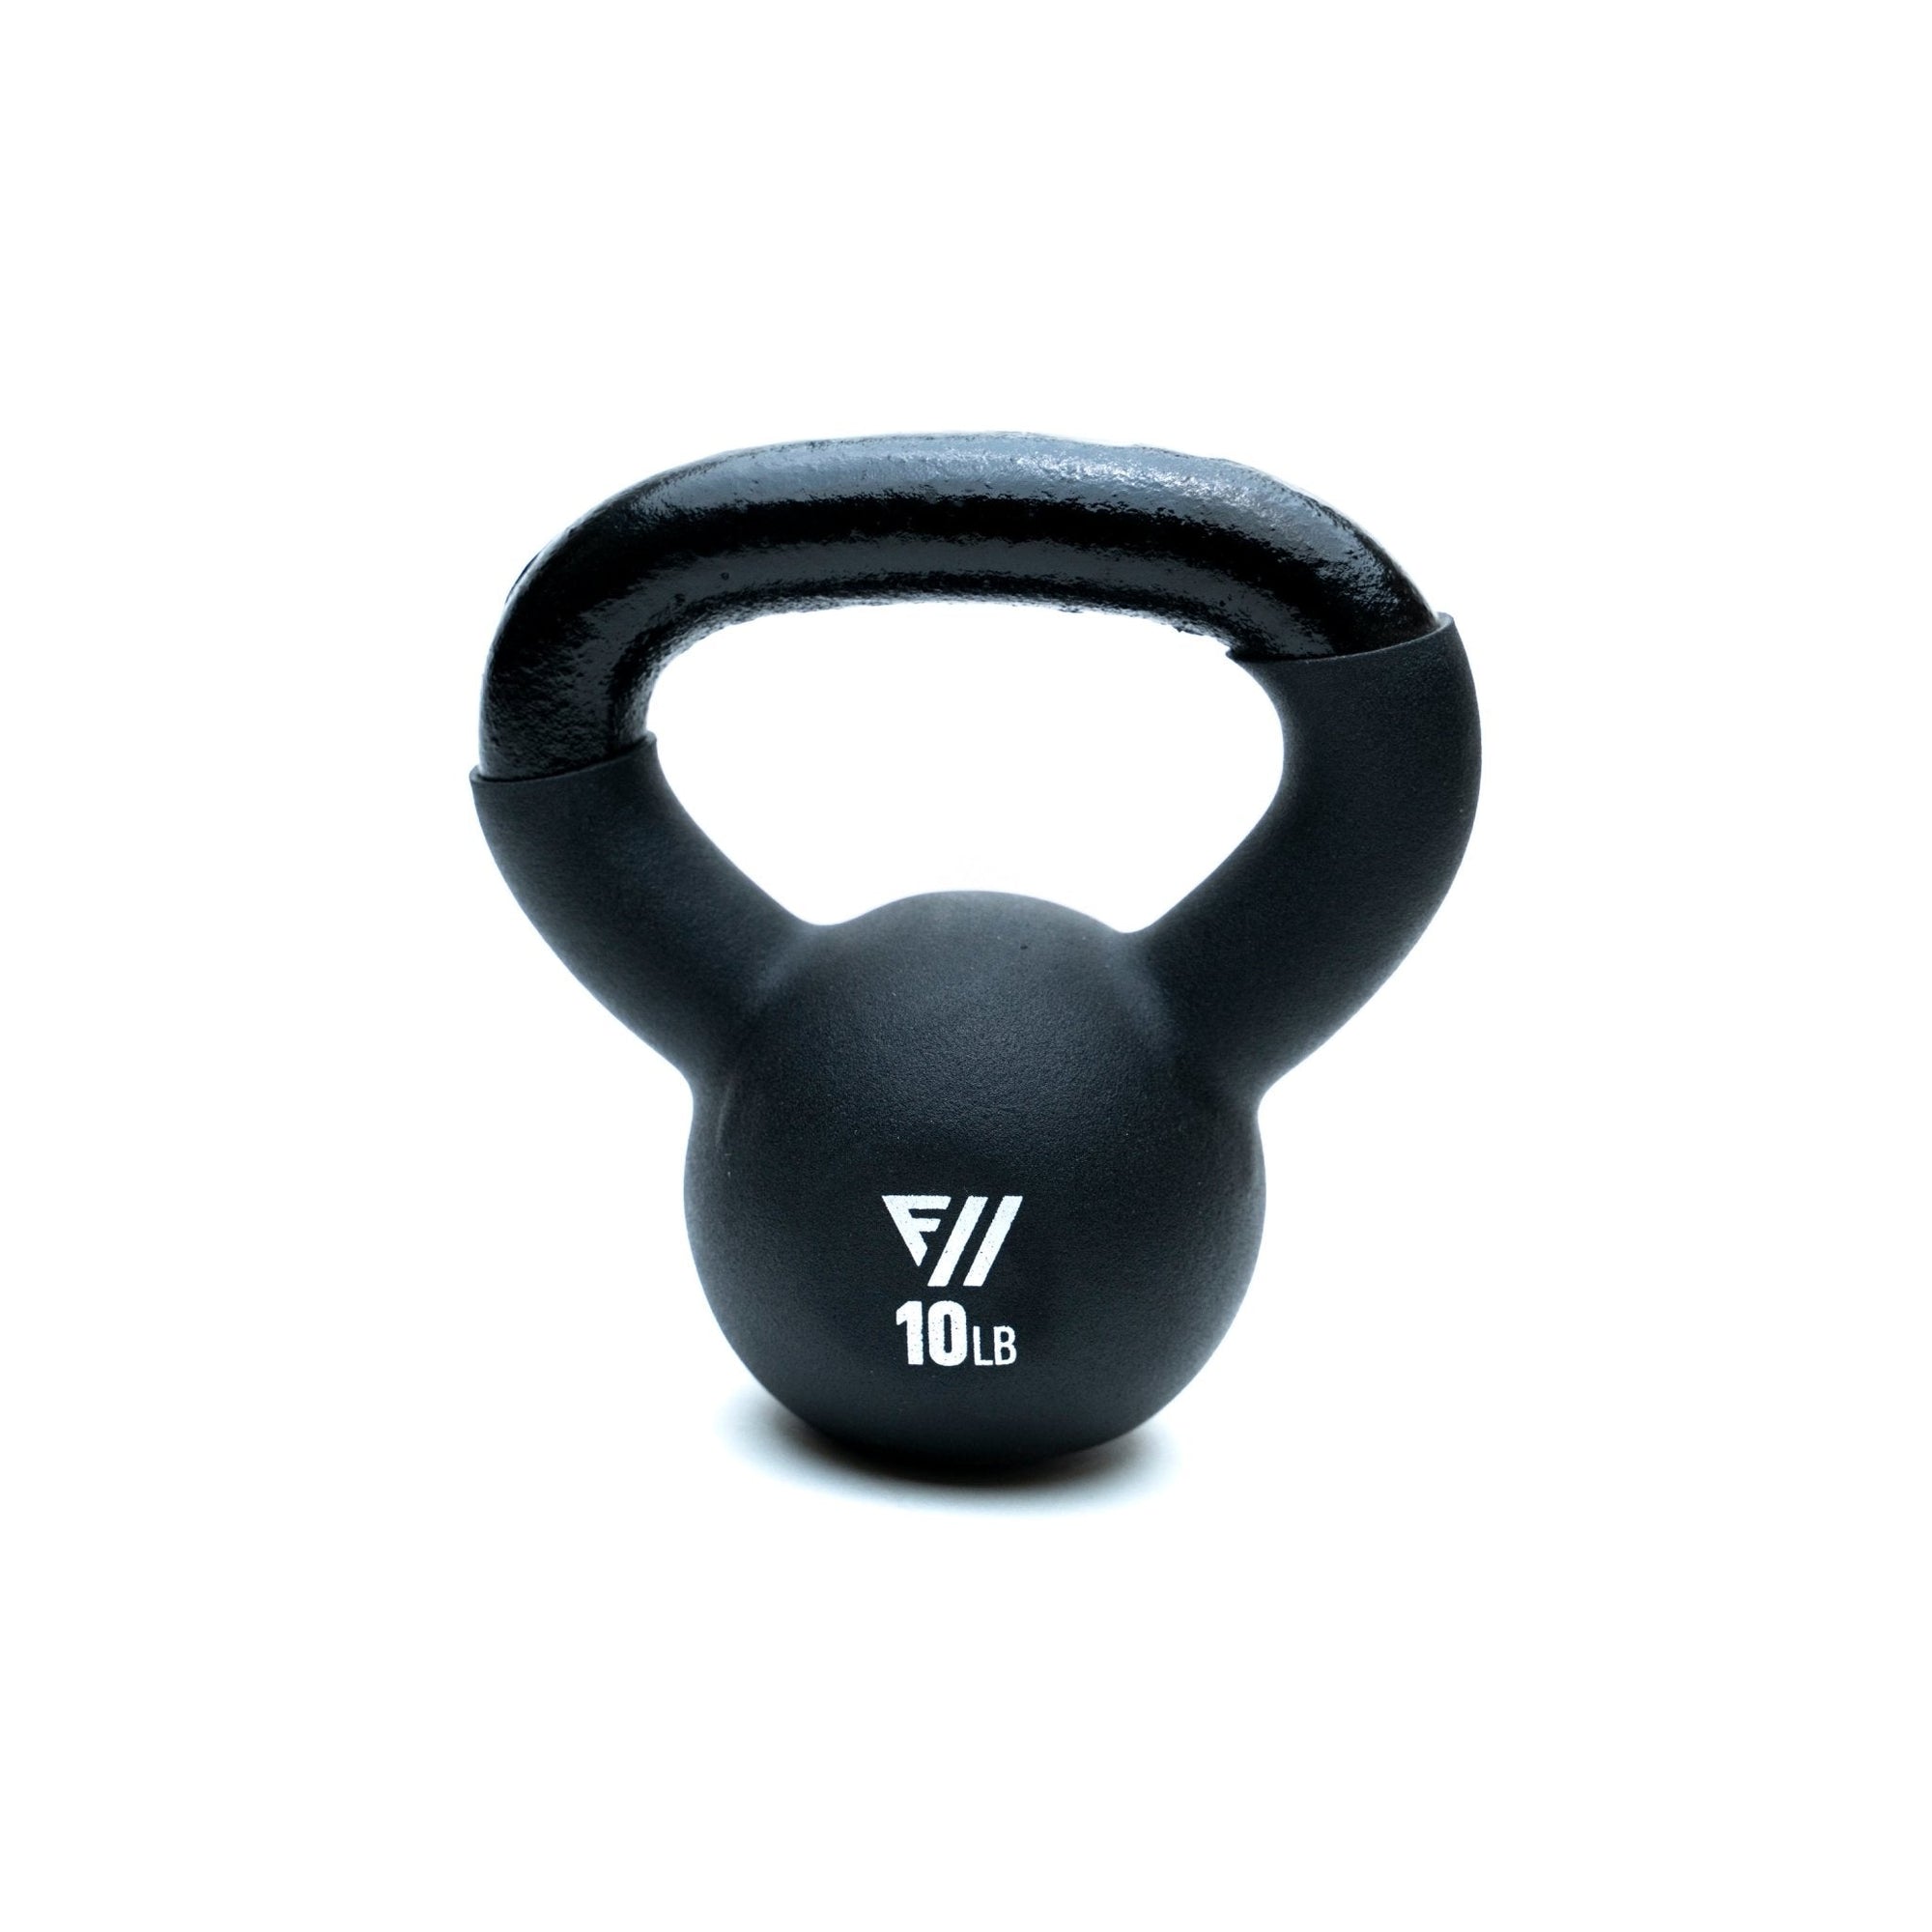 FitWay Equip. 10lb Black Neoprene Kettlebell - Fitness Experience